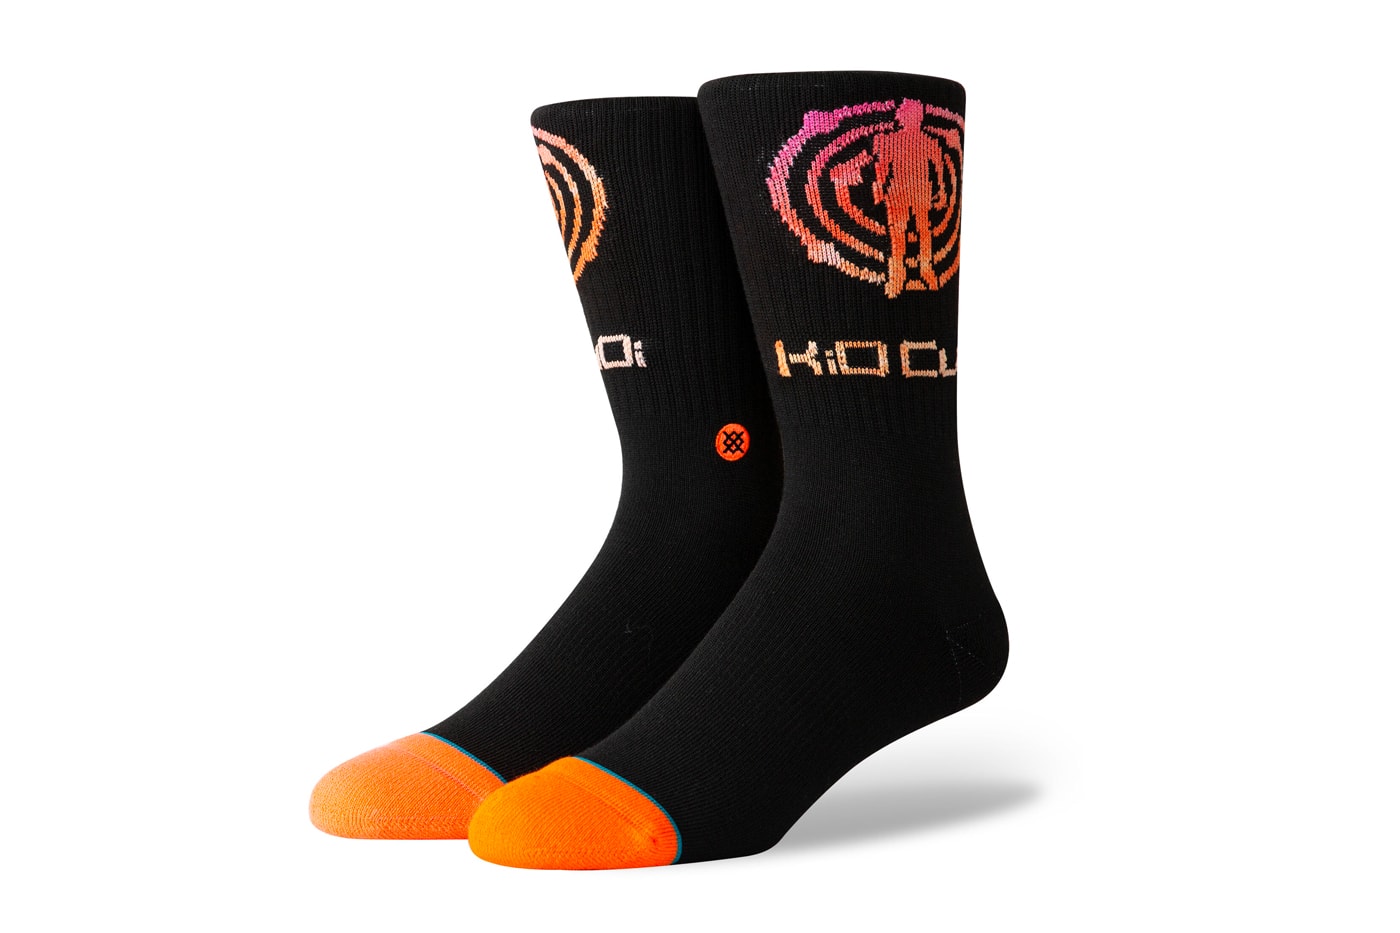 Kid Cudi Man on the Moon The End of Day Stance Socks Anniversary Capsule